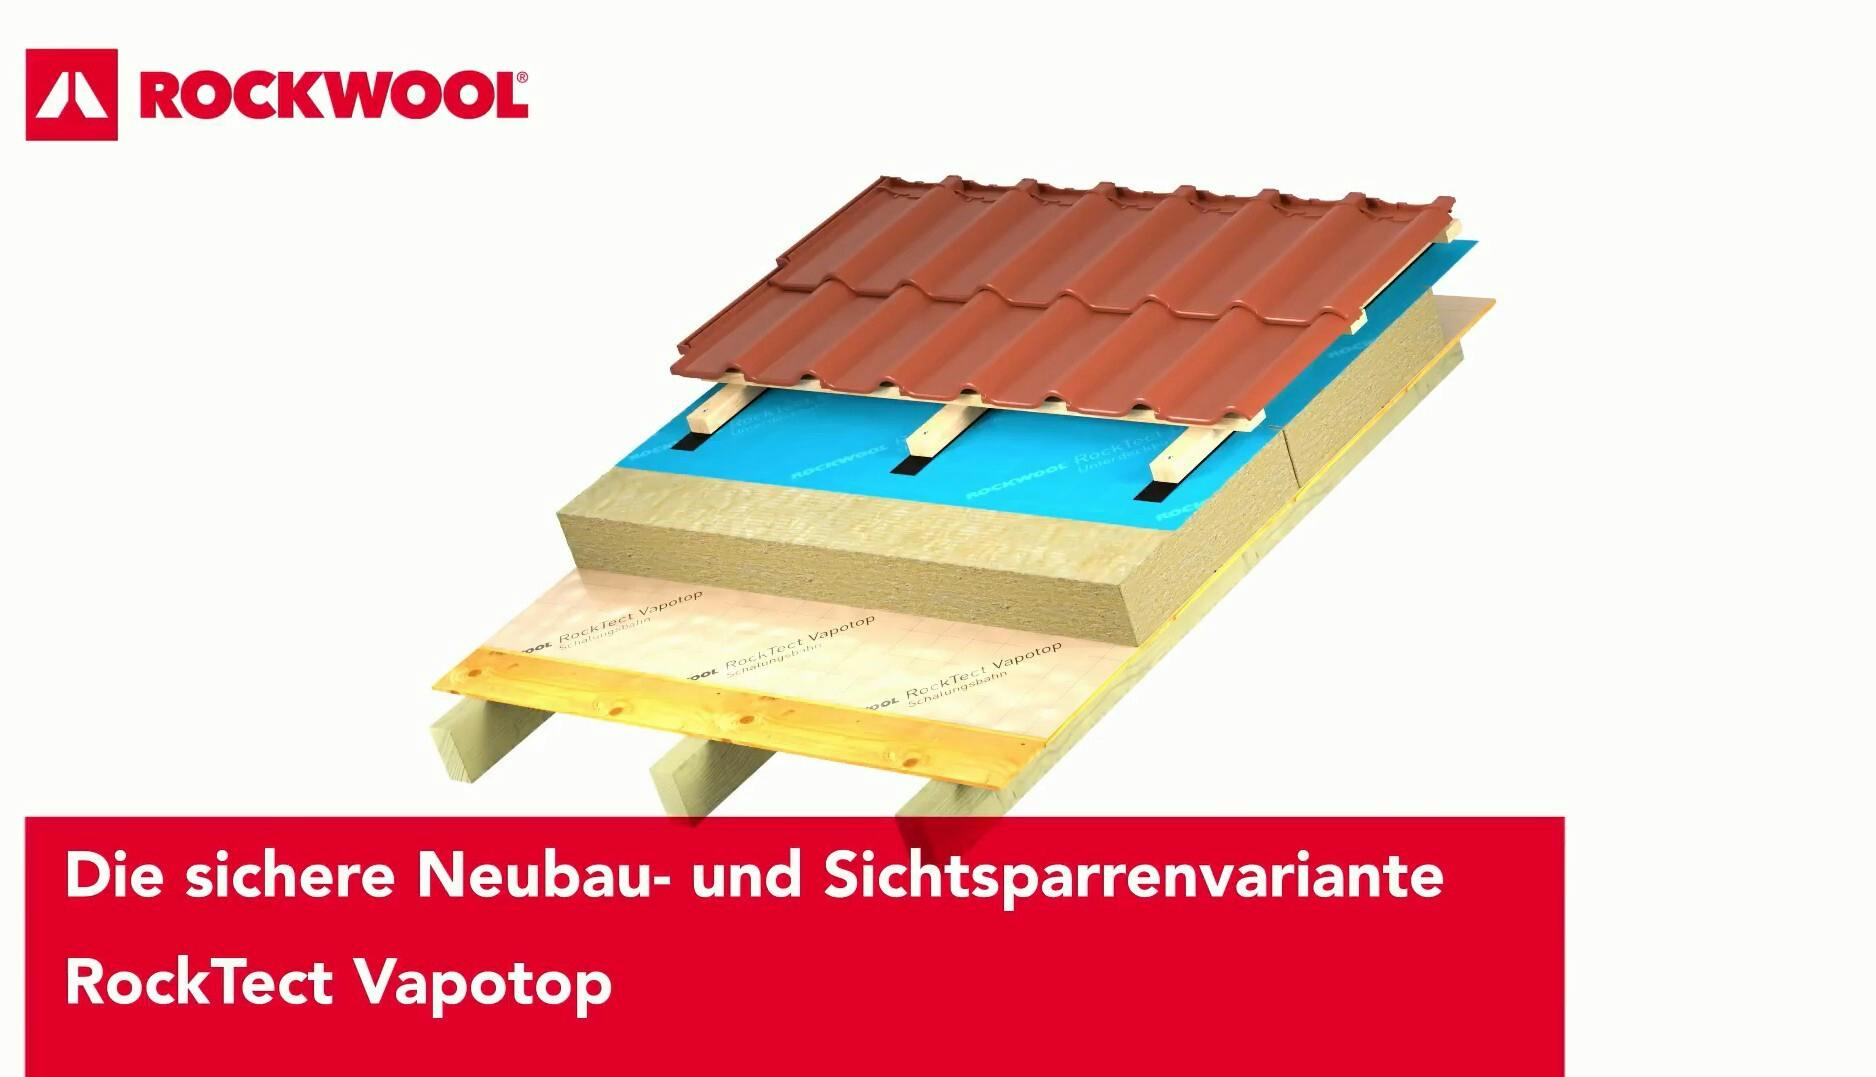 thumb, thumbnail, video, roof, pitched roof, insulation above the rafters, meisterdach, variante vapotop, rocktect vapotop, germany